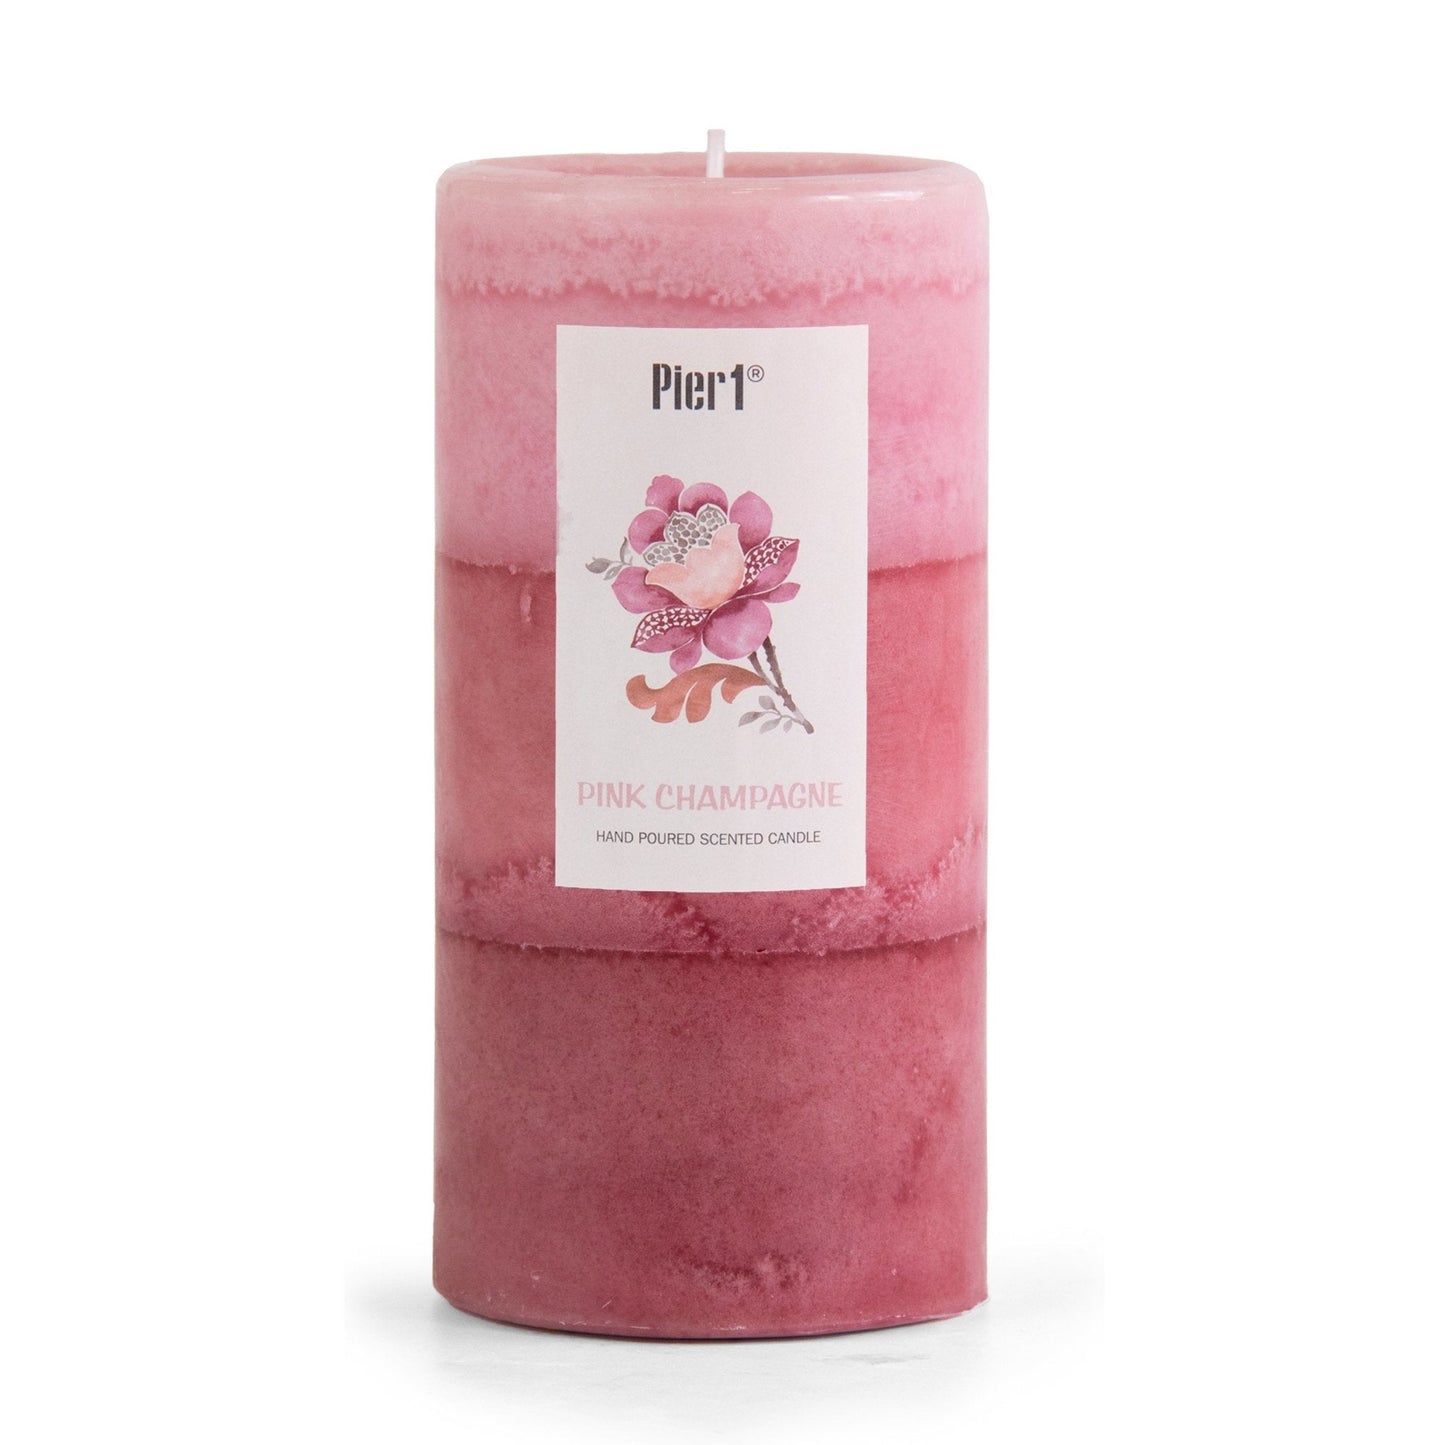 Pier 1 Pink Champagne 3x6 Layered Pillar Candle - Pier 1